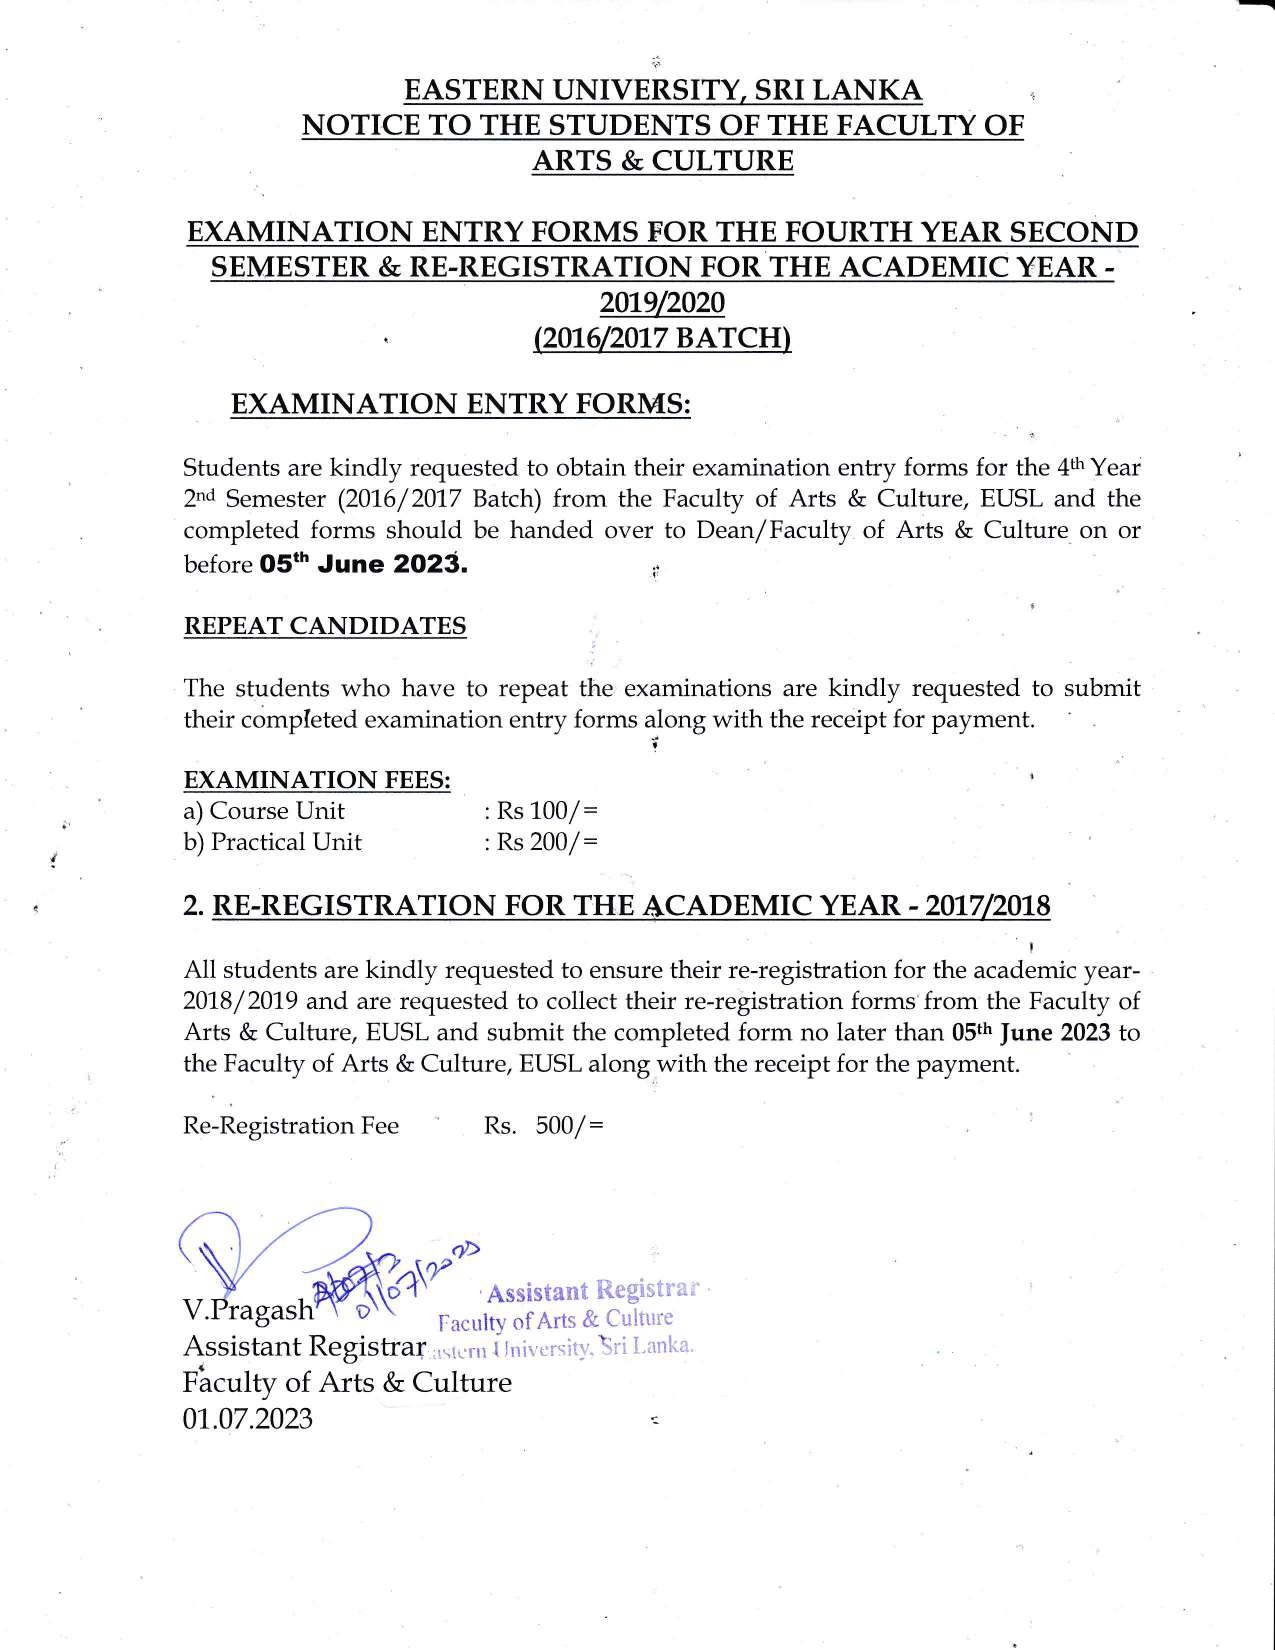  Notice - Examination Entry Forms & Re-registration for 4th Year 2nd Semester 2016 2017, FAC.jpg